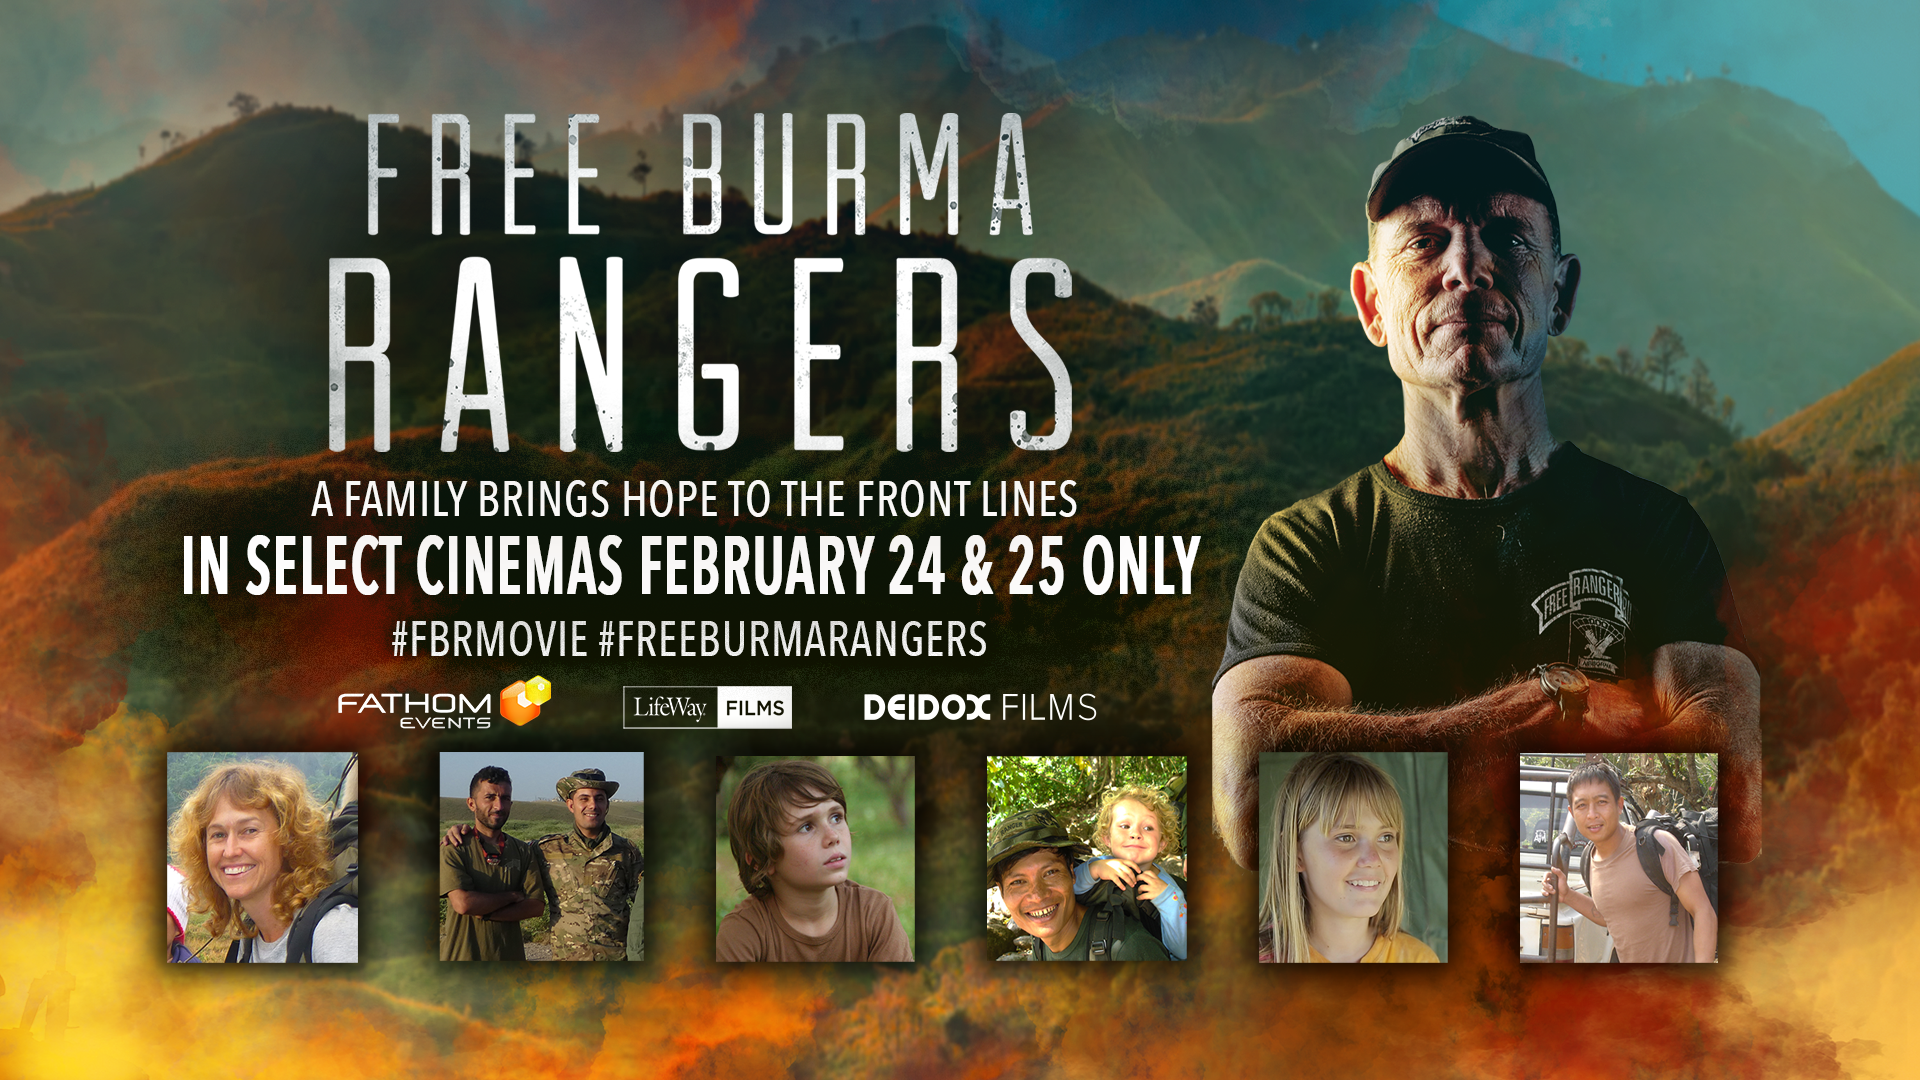 26 HQ Pictures Free Burma Rangers Movie Online / New Movie About The Real Life Christian Family Rescuing Innocents On Battlefields Premieres Friday Cbn News